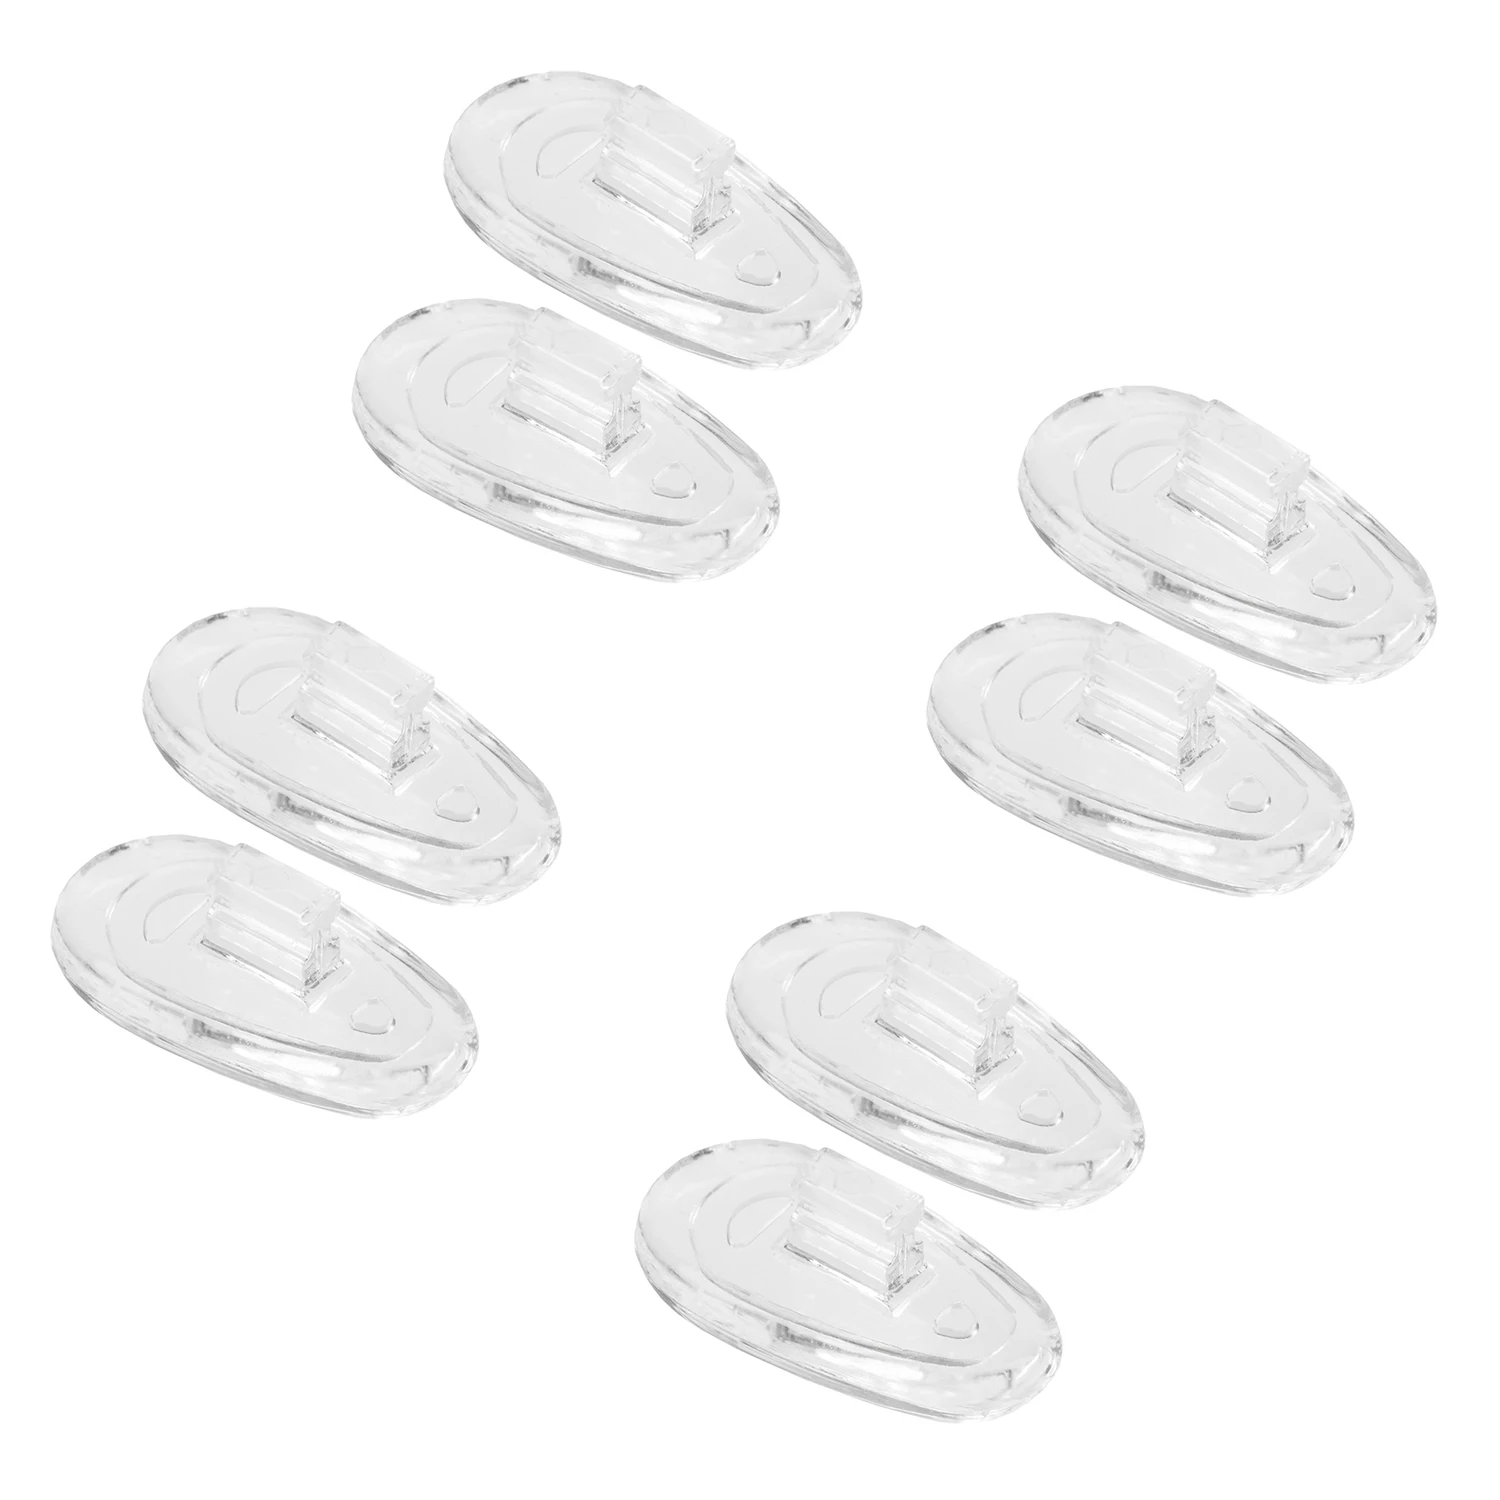 

4 Pairs Replacement Nosepad Pieces for Oakley New Whisker OO4141 Sunglasses Eyeglasses, Clear Nose Pads Guard